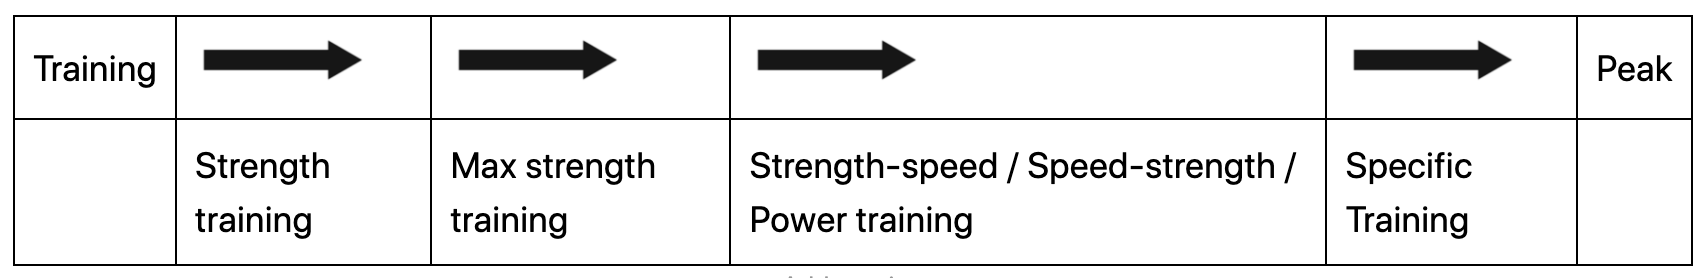 Timeline showing how to periodise strength and power training before peak performance